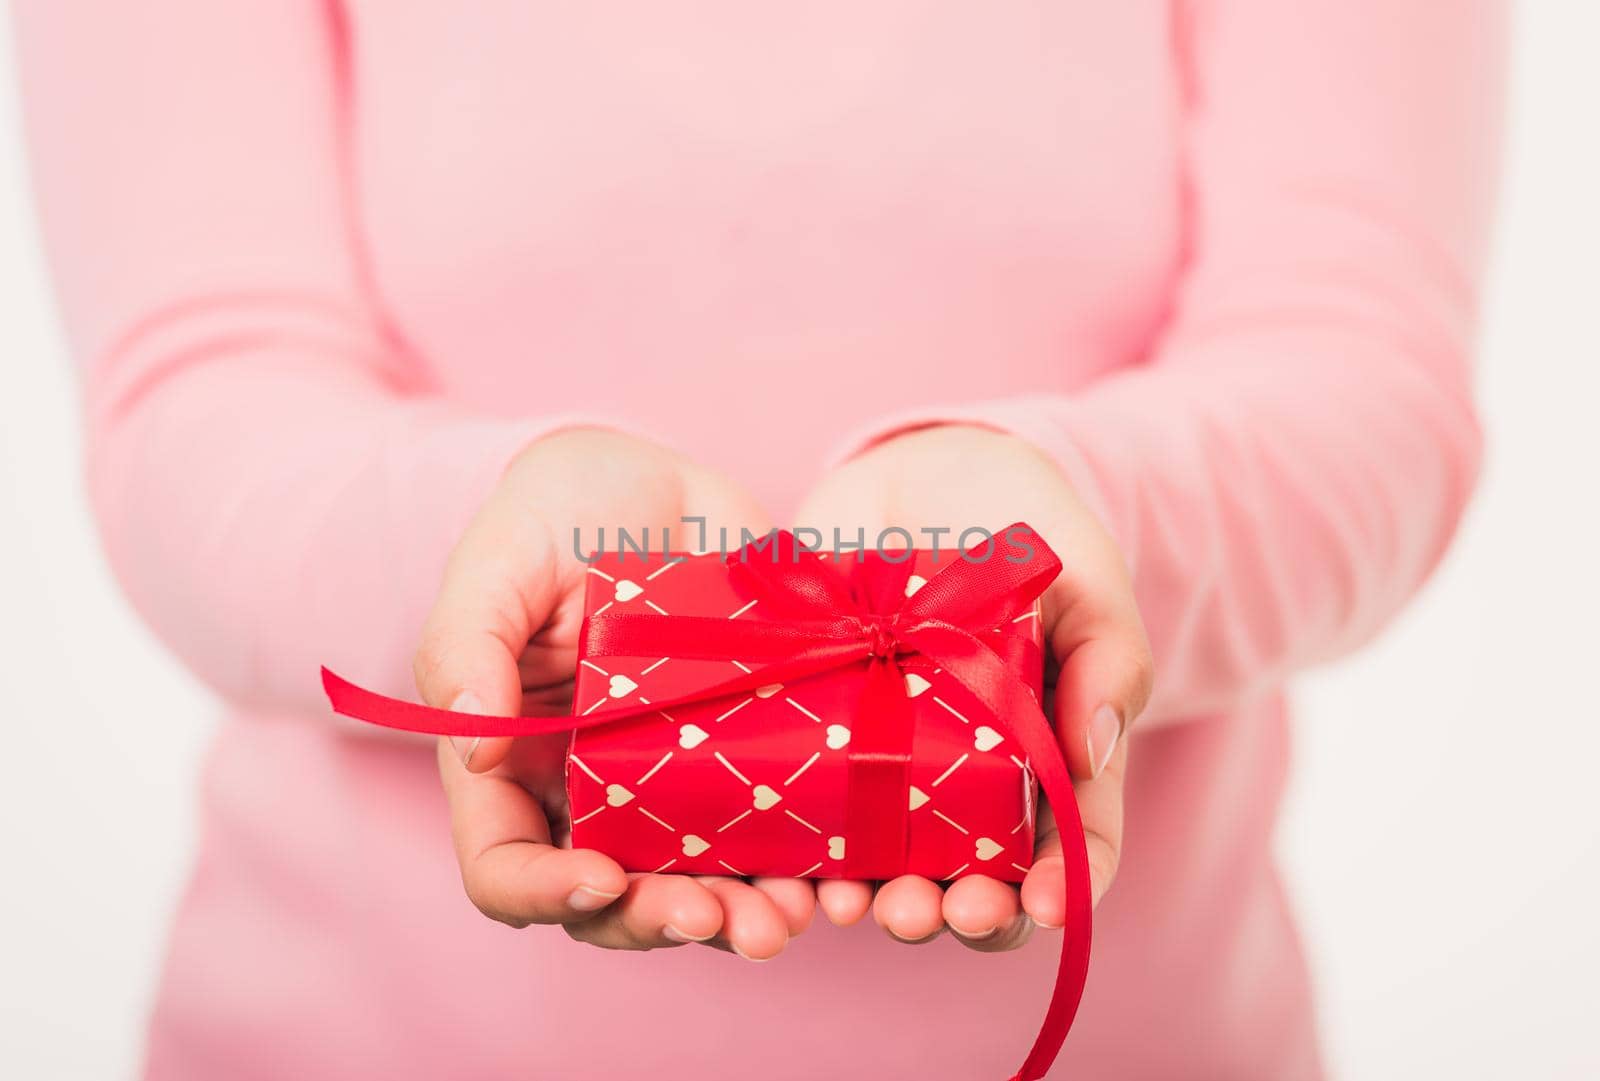 Female beauty hands holding small gift package box present by Sorapop